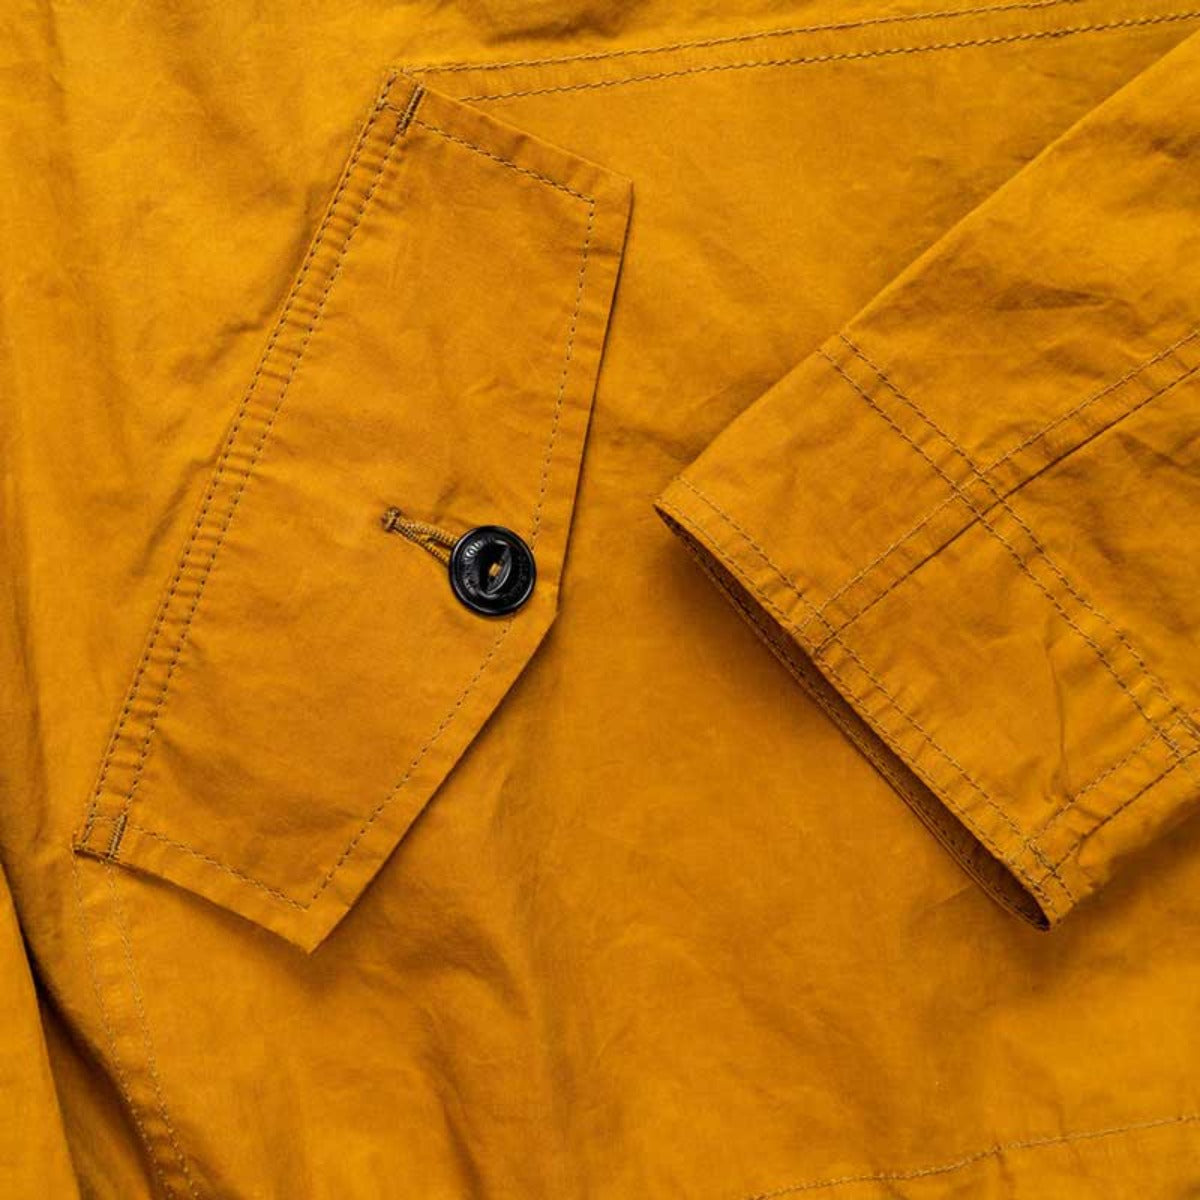 Mustard hooded smock by Yarmouth Oilskins. Wax finish and water repellent